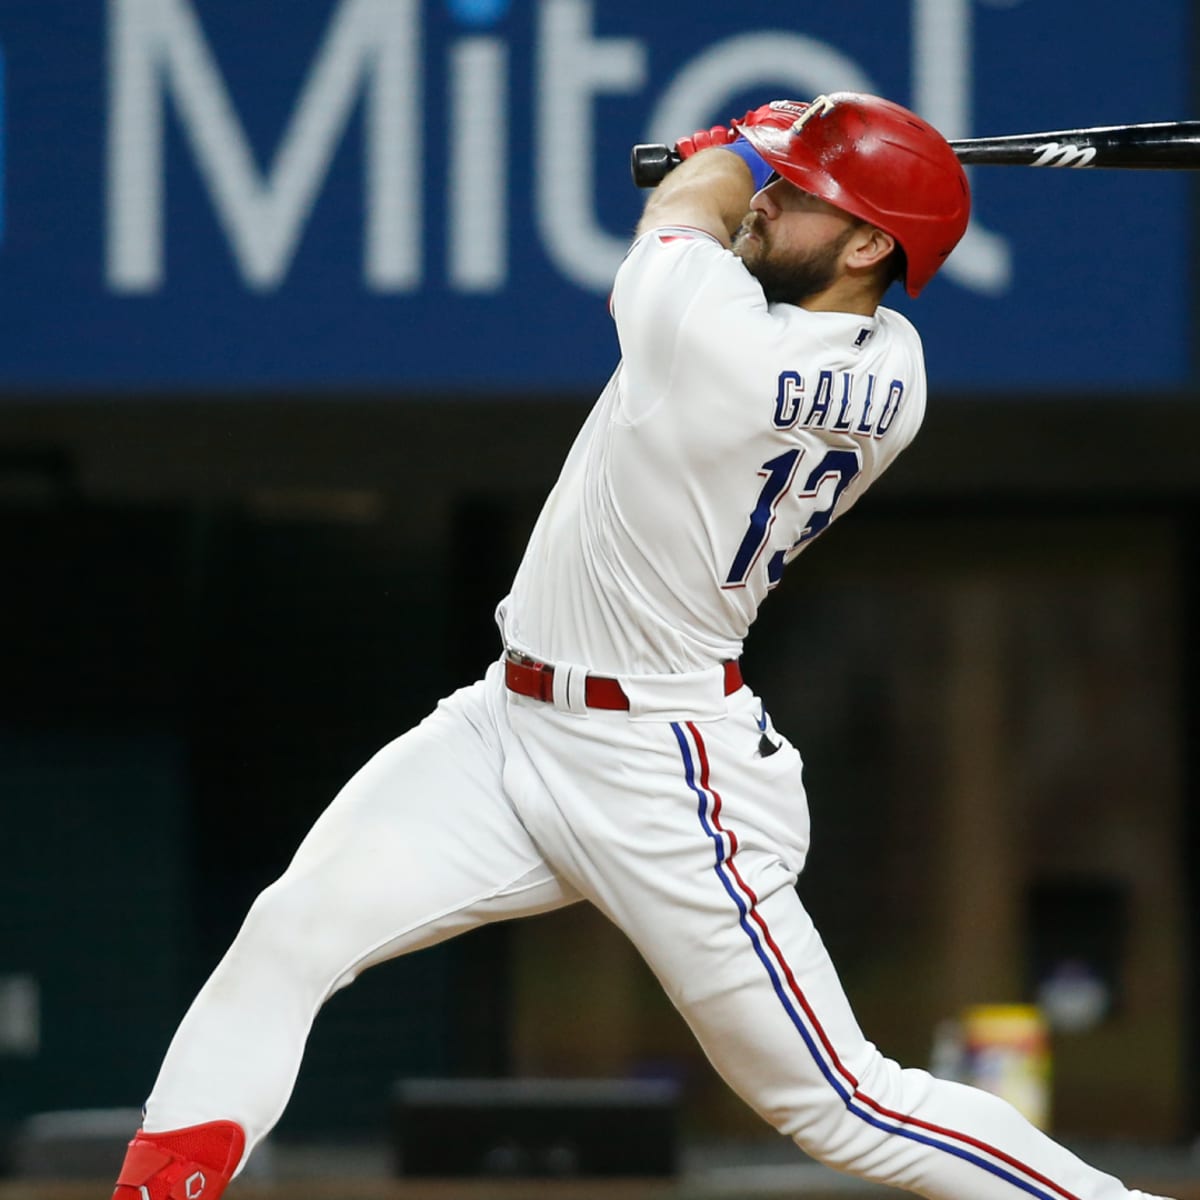 Joey Gallo] Thank you, Texas. It's been an honor to wear this jersey, and  call myself a Texas Ranger for the past 9 years. You will forever have a  place in my